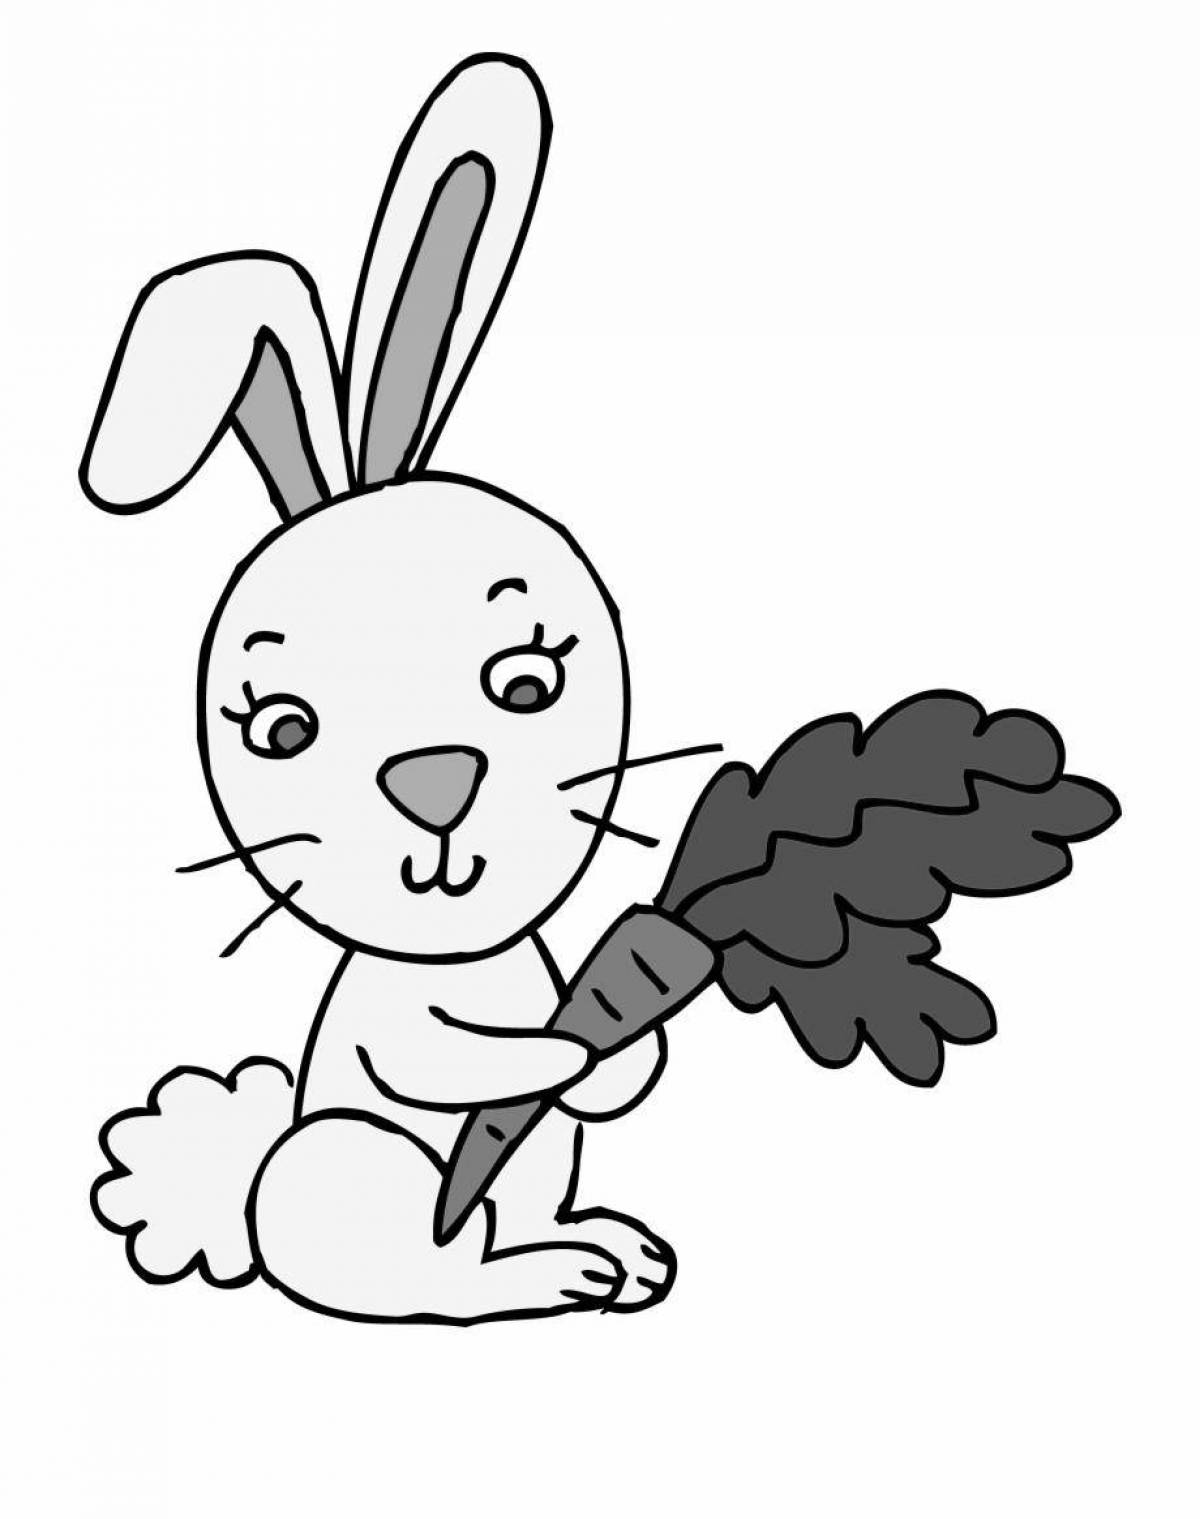 Color-frenzy coloring page bunny with carrot for kids